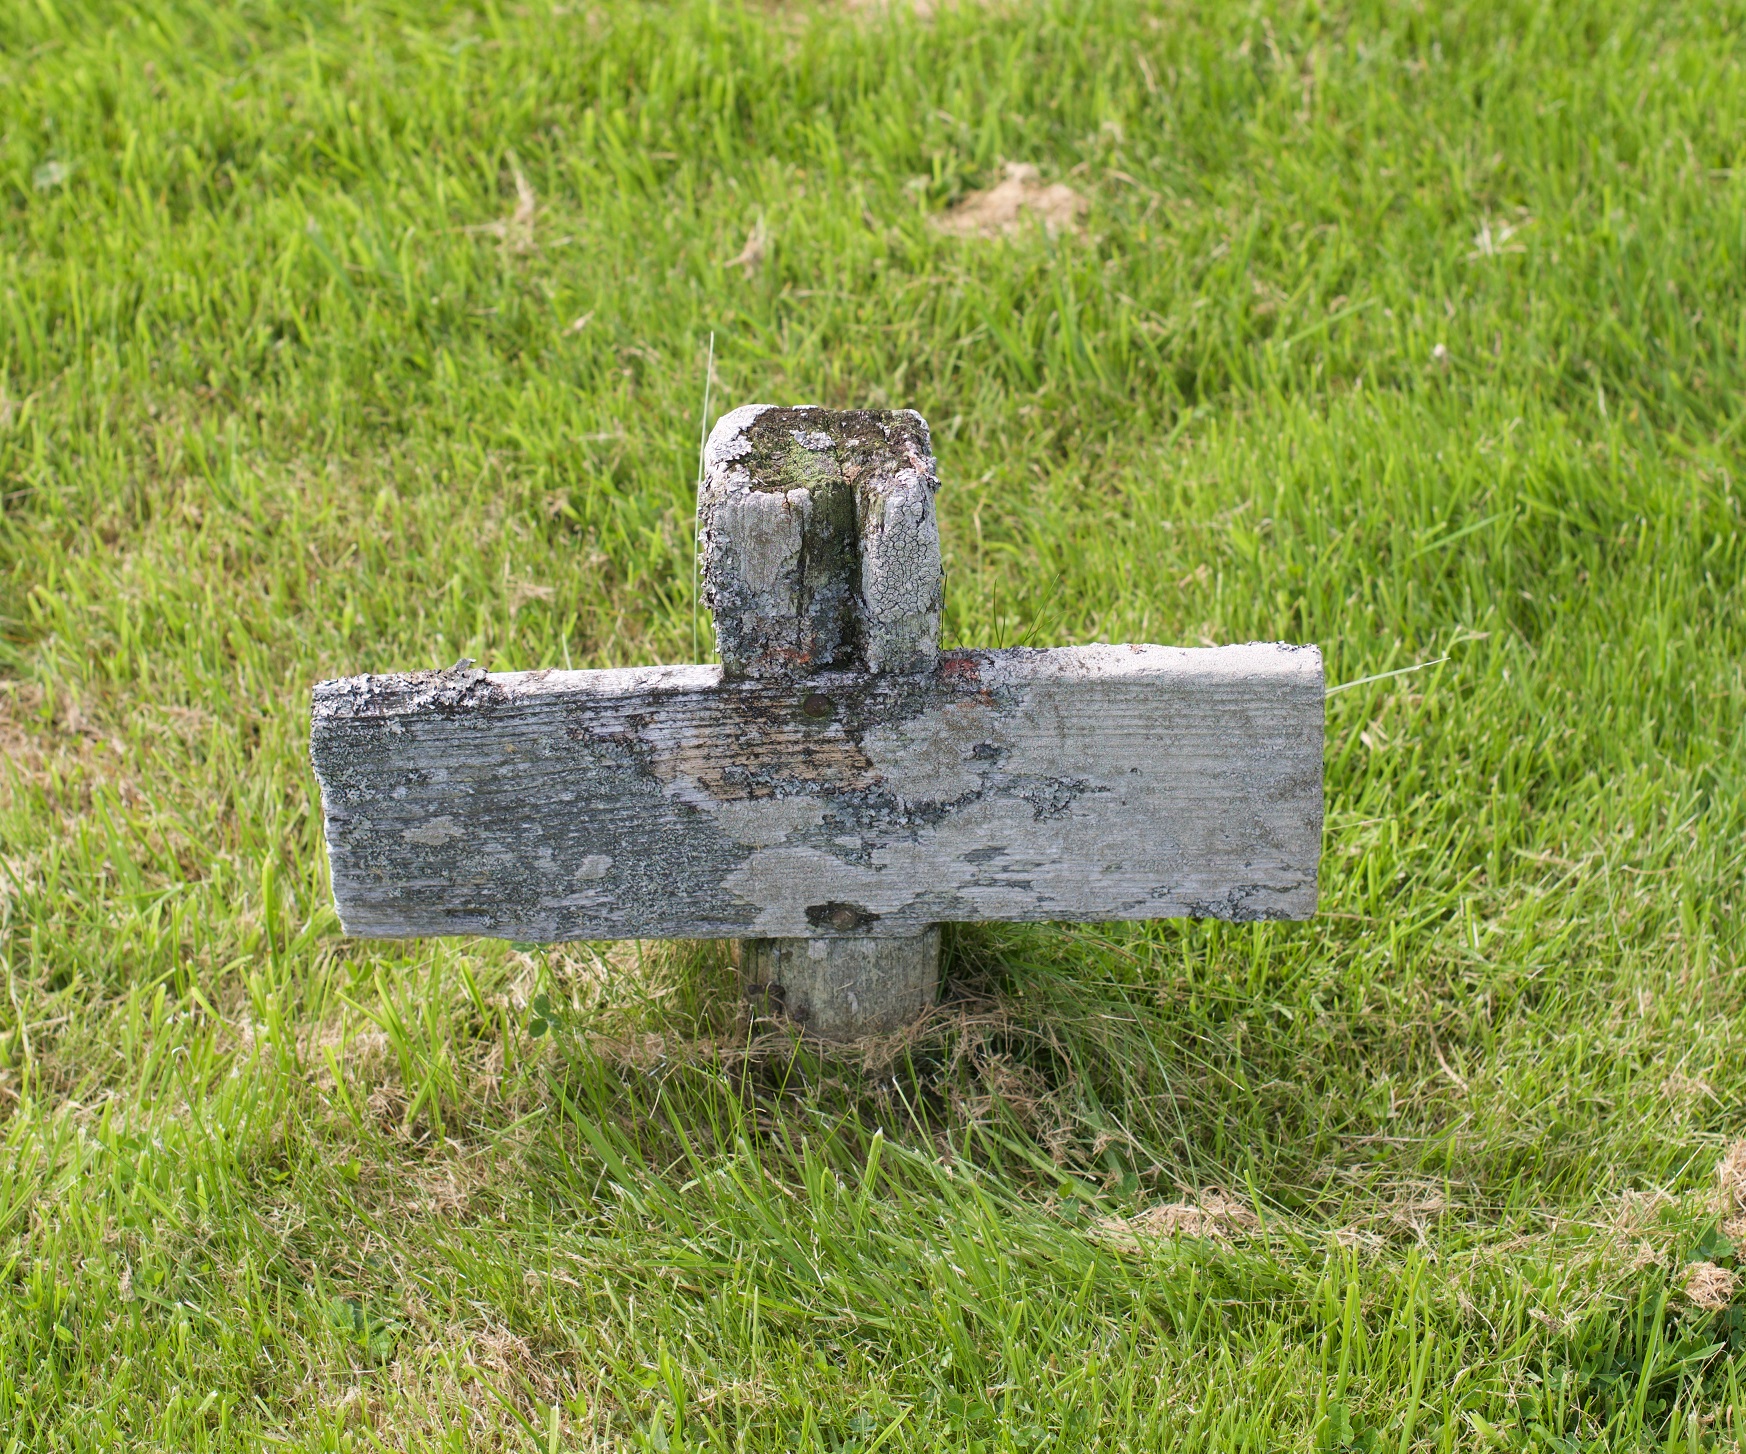 a wooden cross on grassy ground